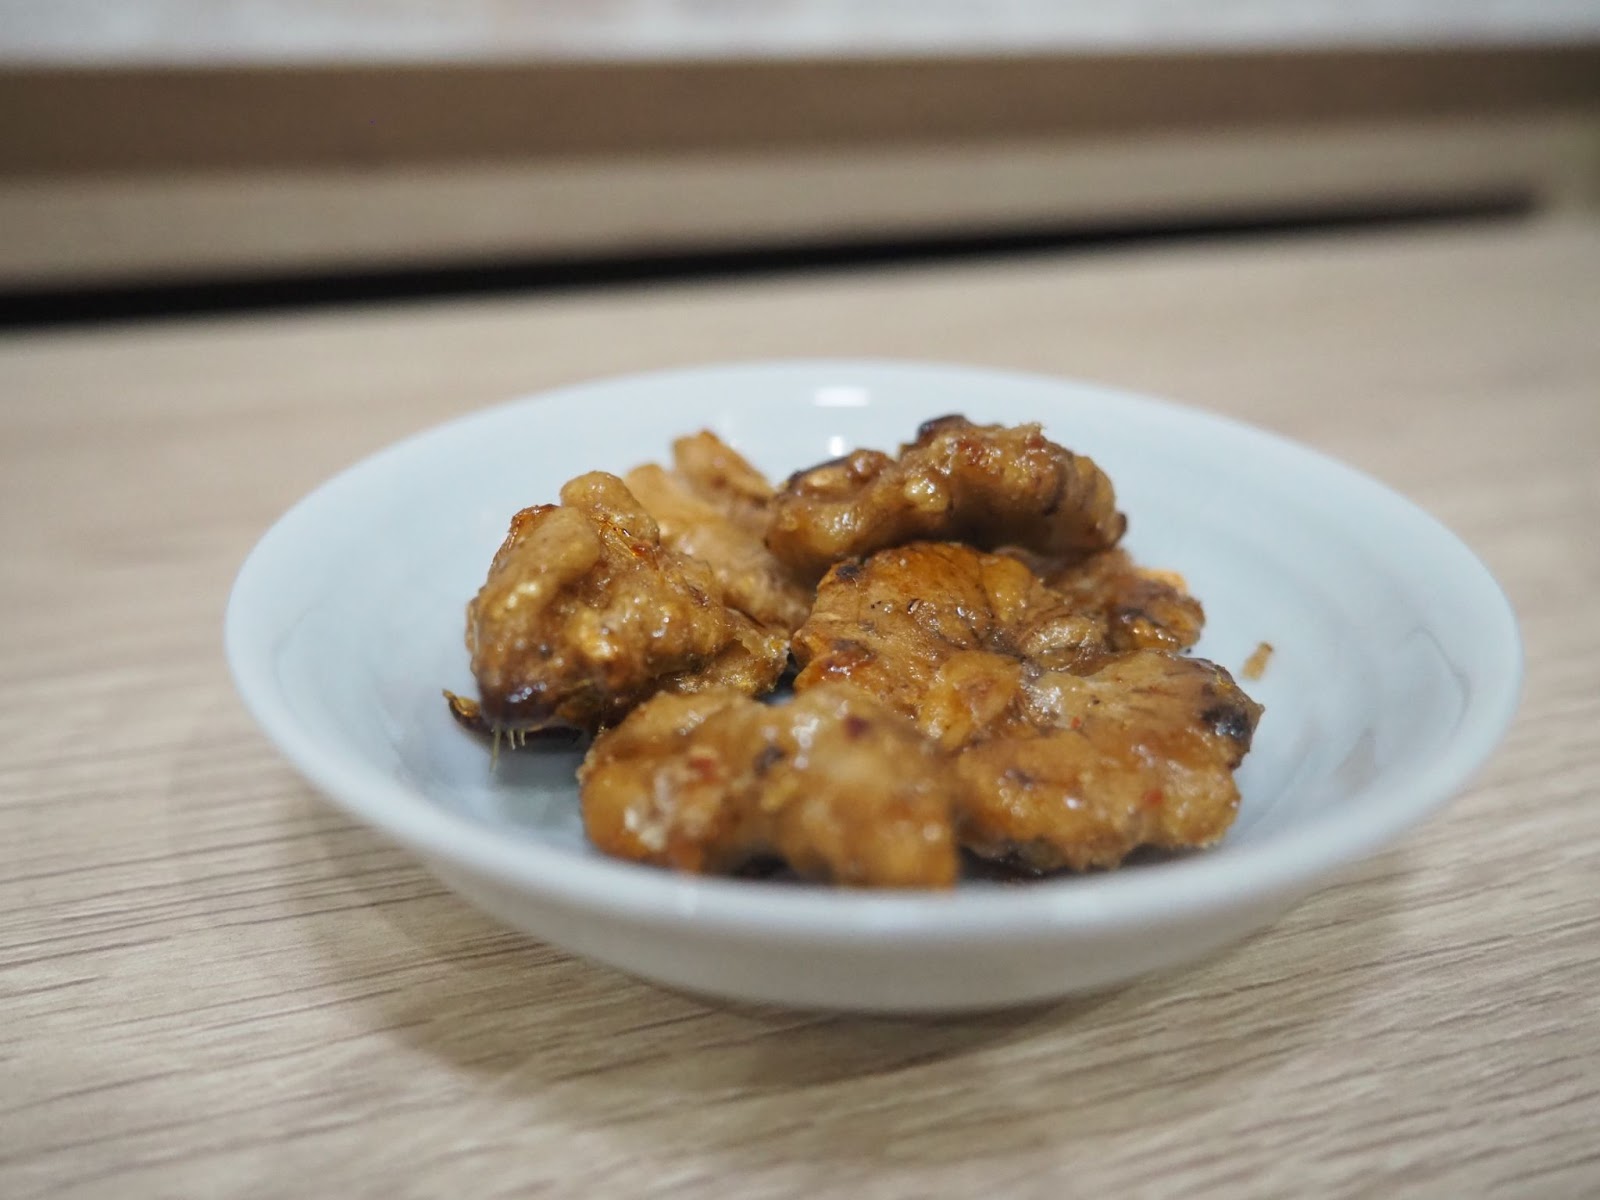 Candied walnuts (with a twist)